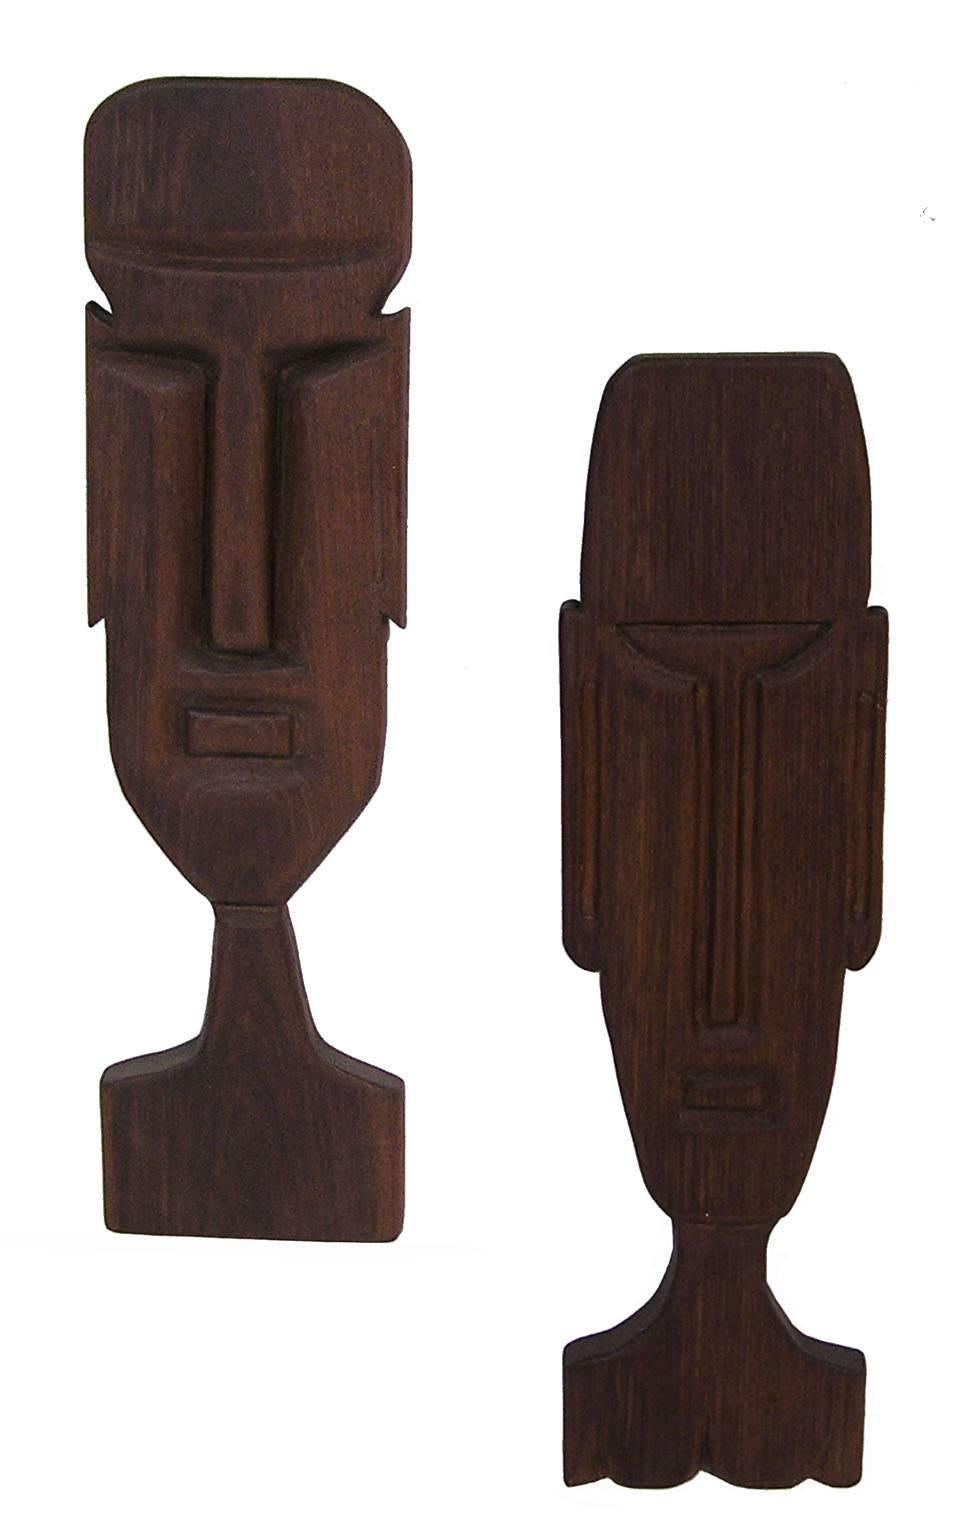 A pair of figural solid teak wall hangings from the 1950s Tiki Modern era. Beautiful craftsmanship throughout depicting the head and upper body of a man and woman. Overall excellent condition.